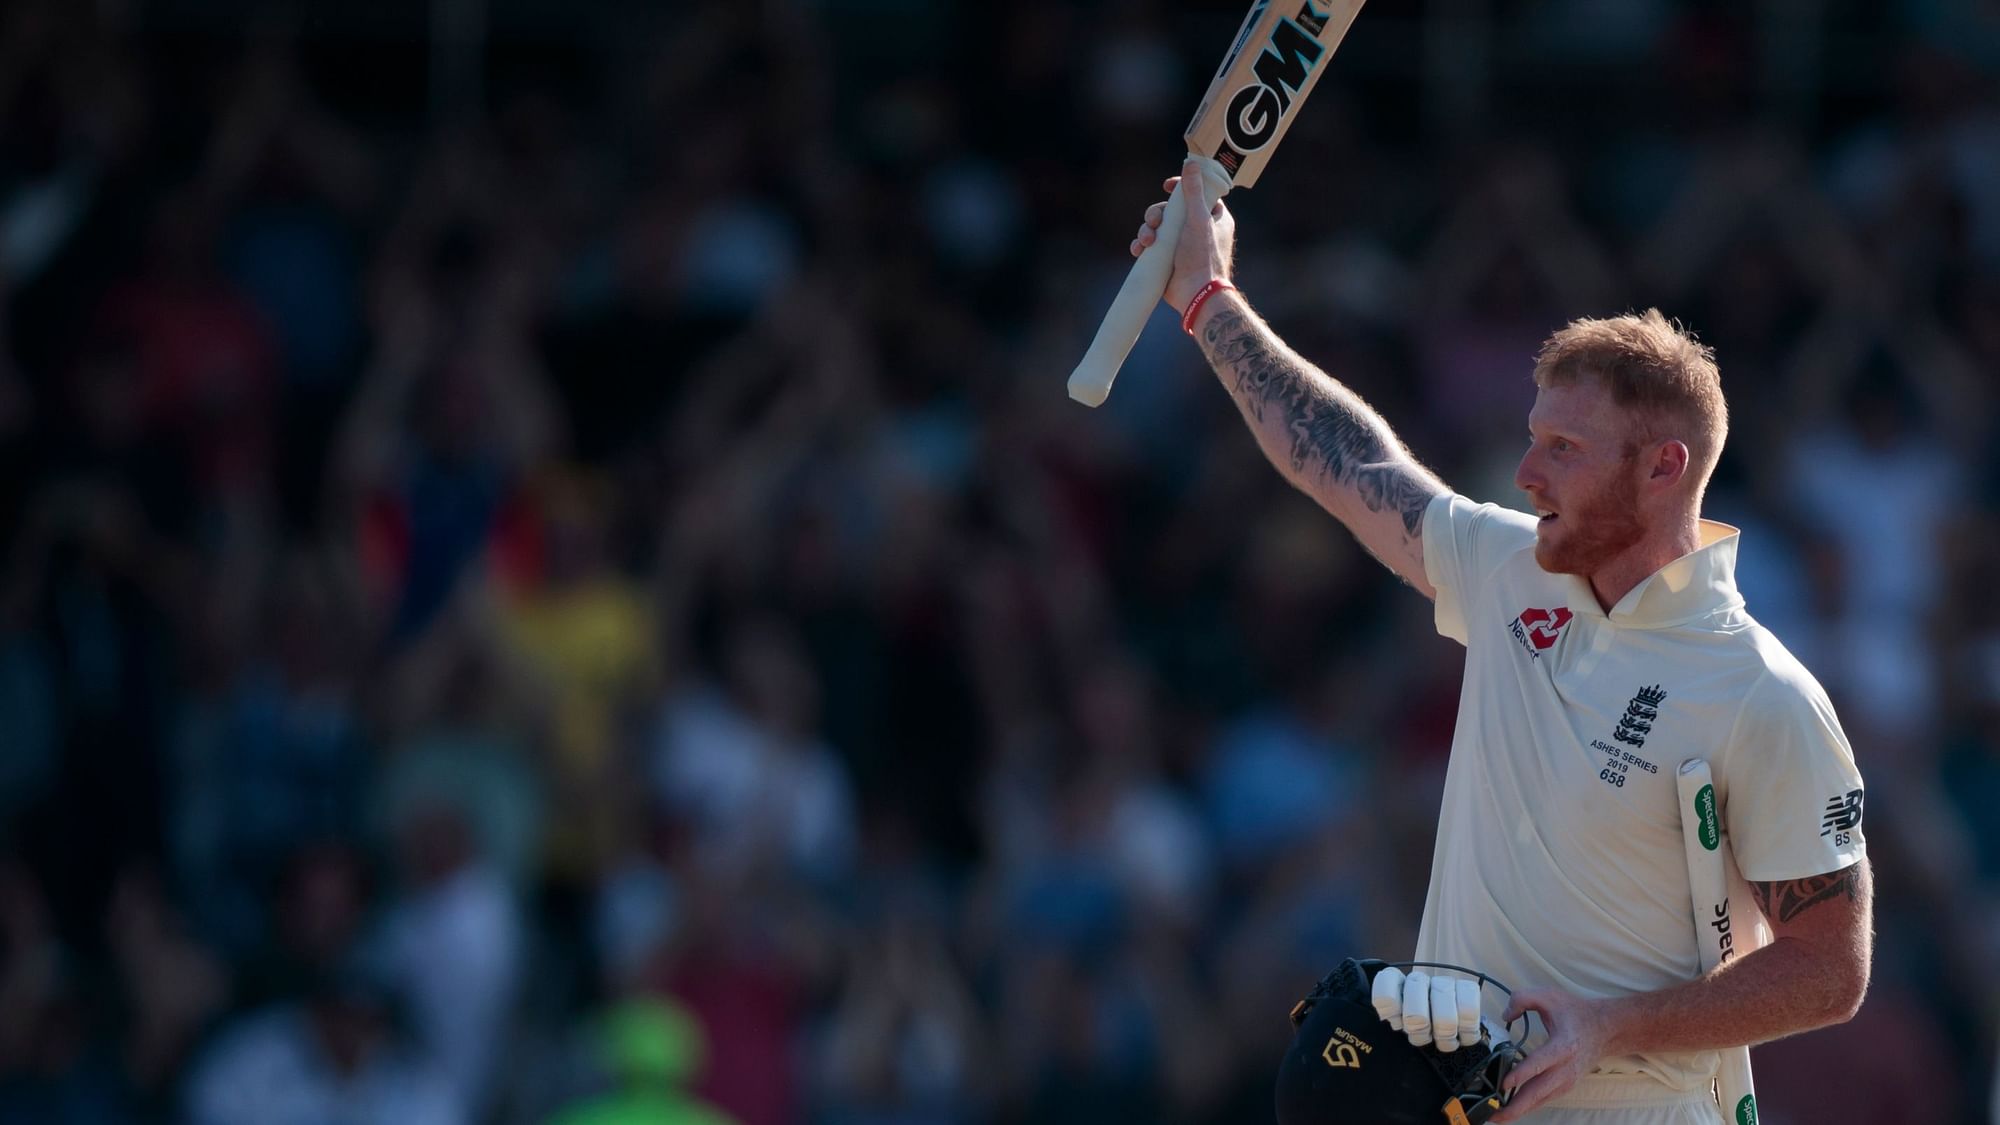 England all-rounder Ben Stokes’ masterclass unbeaten 135 helped his side win the third Ashes Test at Headingley.